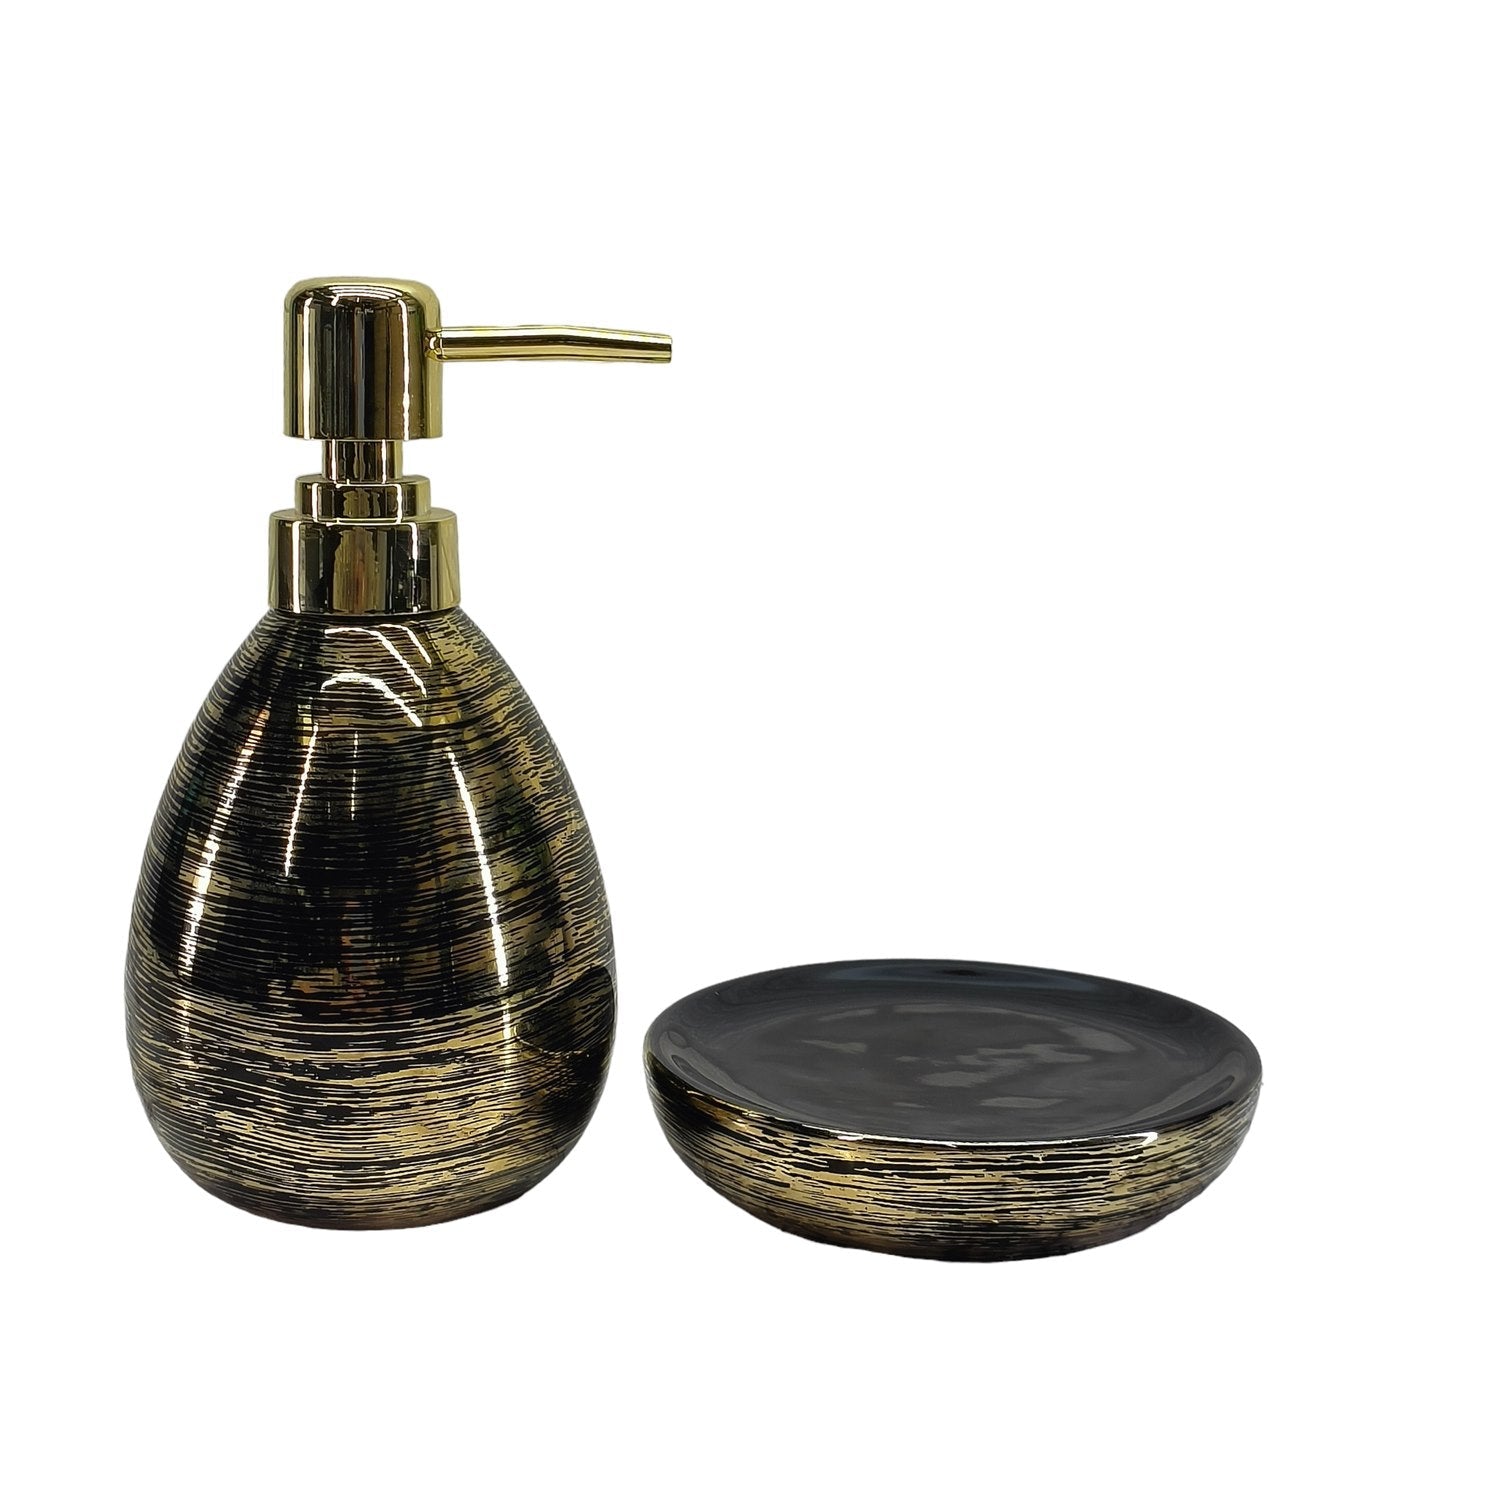 Ceramic Soap Dispenser Set with Soap Dish, Set of 2 Bathroom Accessories for Home (C2042)